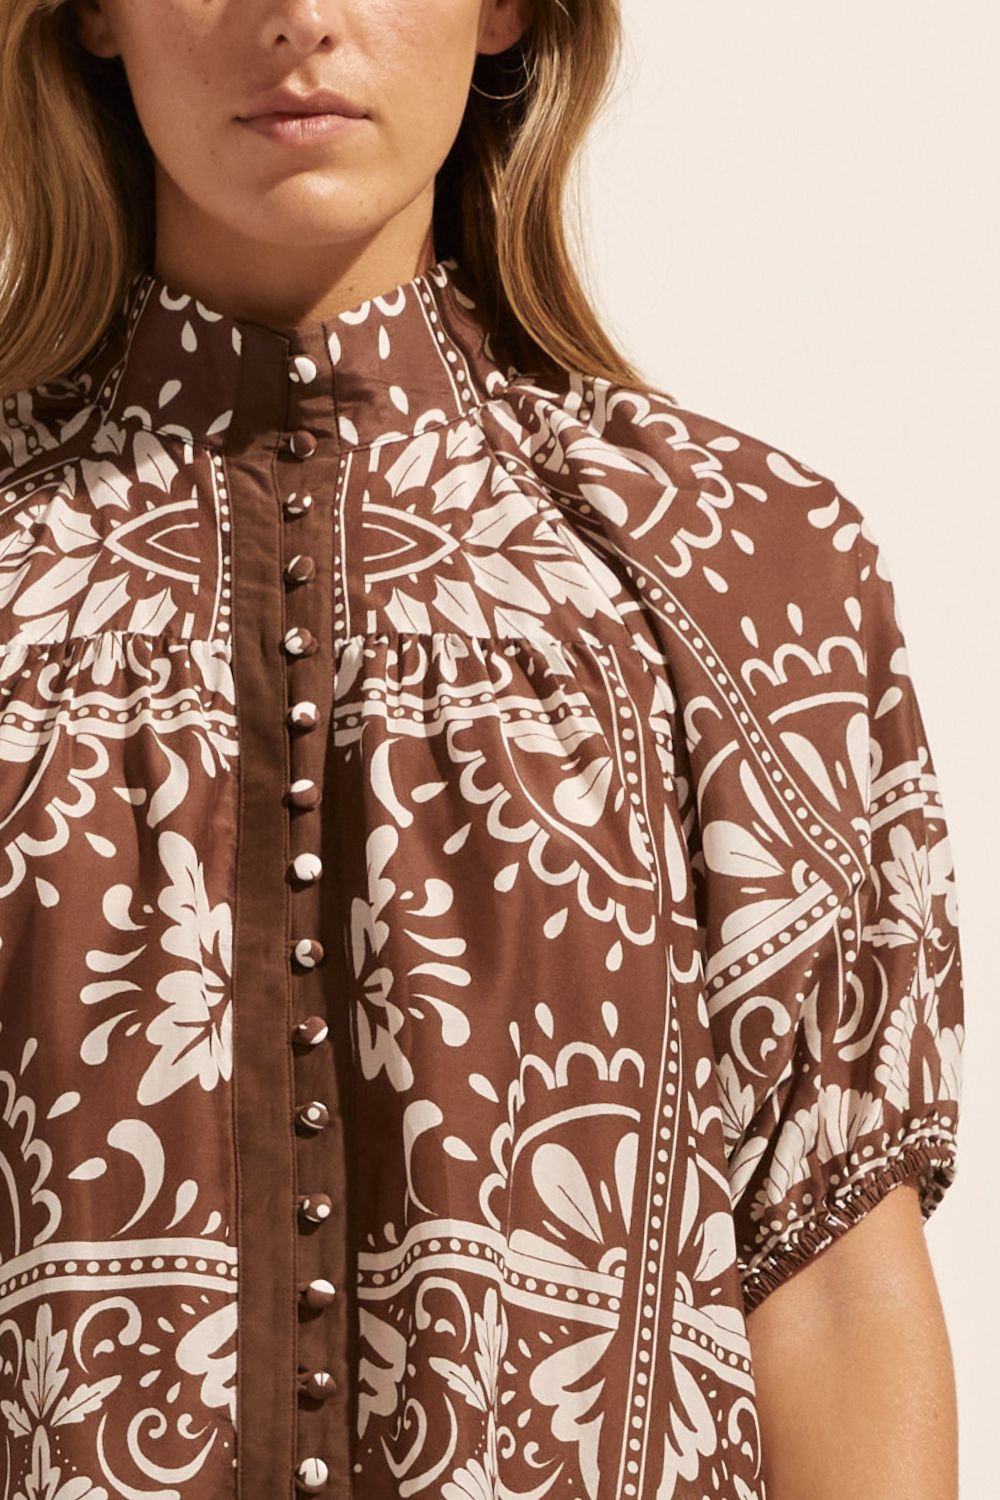 brown and white print, high neck, buttons to waist, mid length sleeve, dress, drop waist, close up image